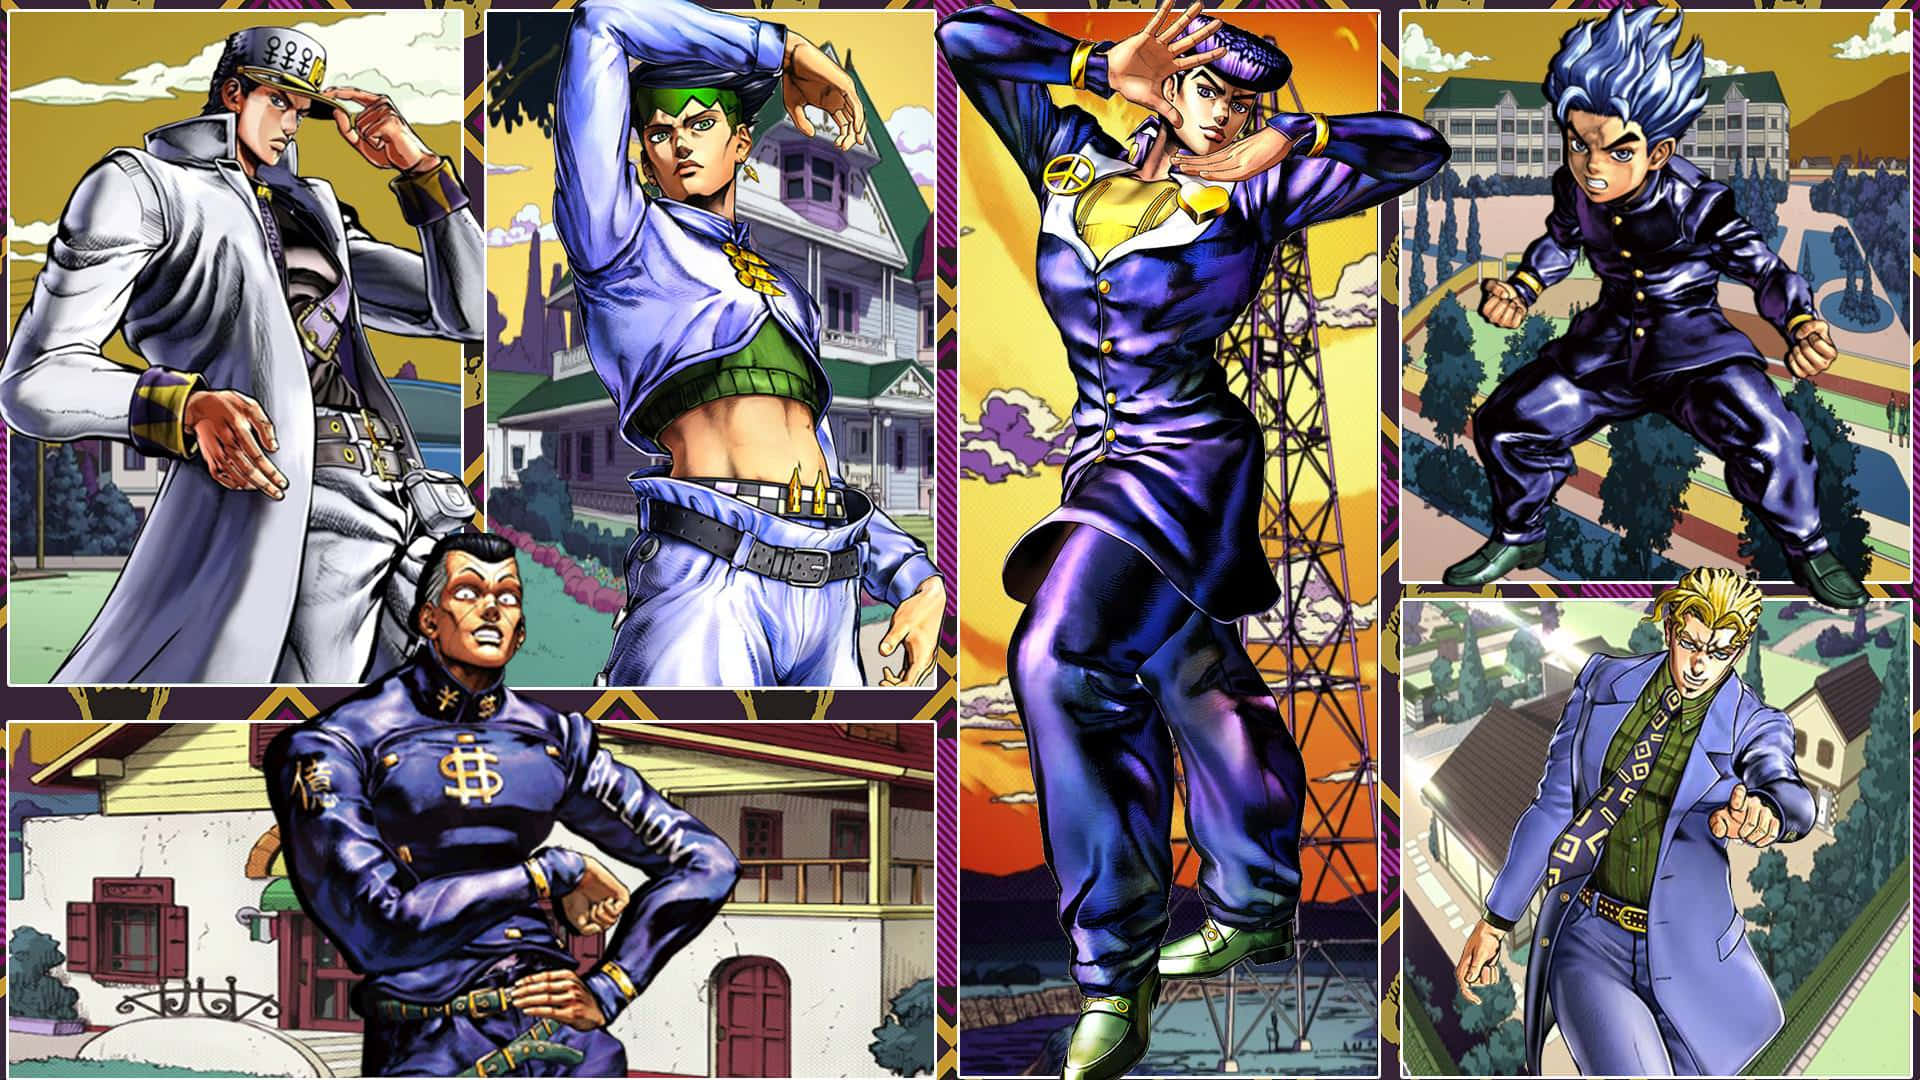 Diamond Is Unbreakable - Anime Characters in Action Wallpaper